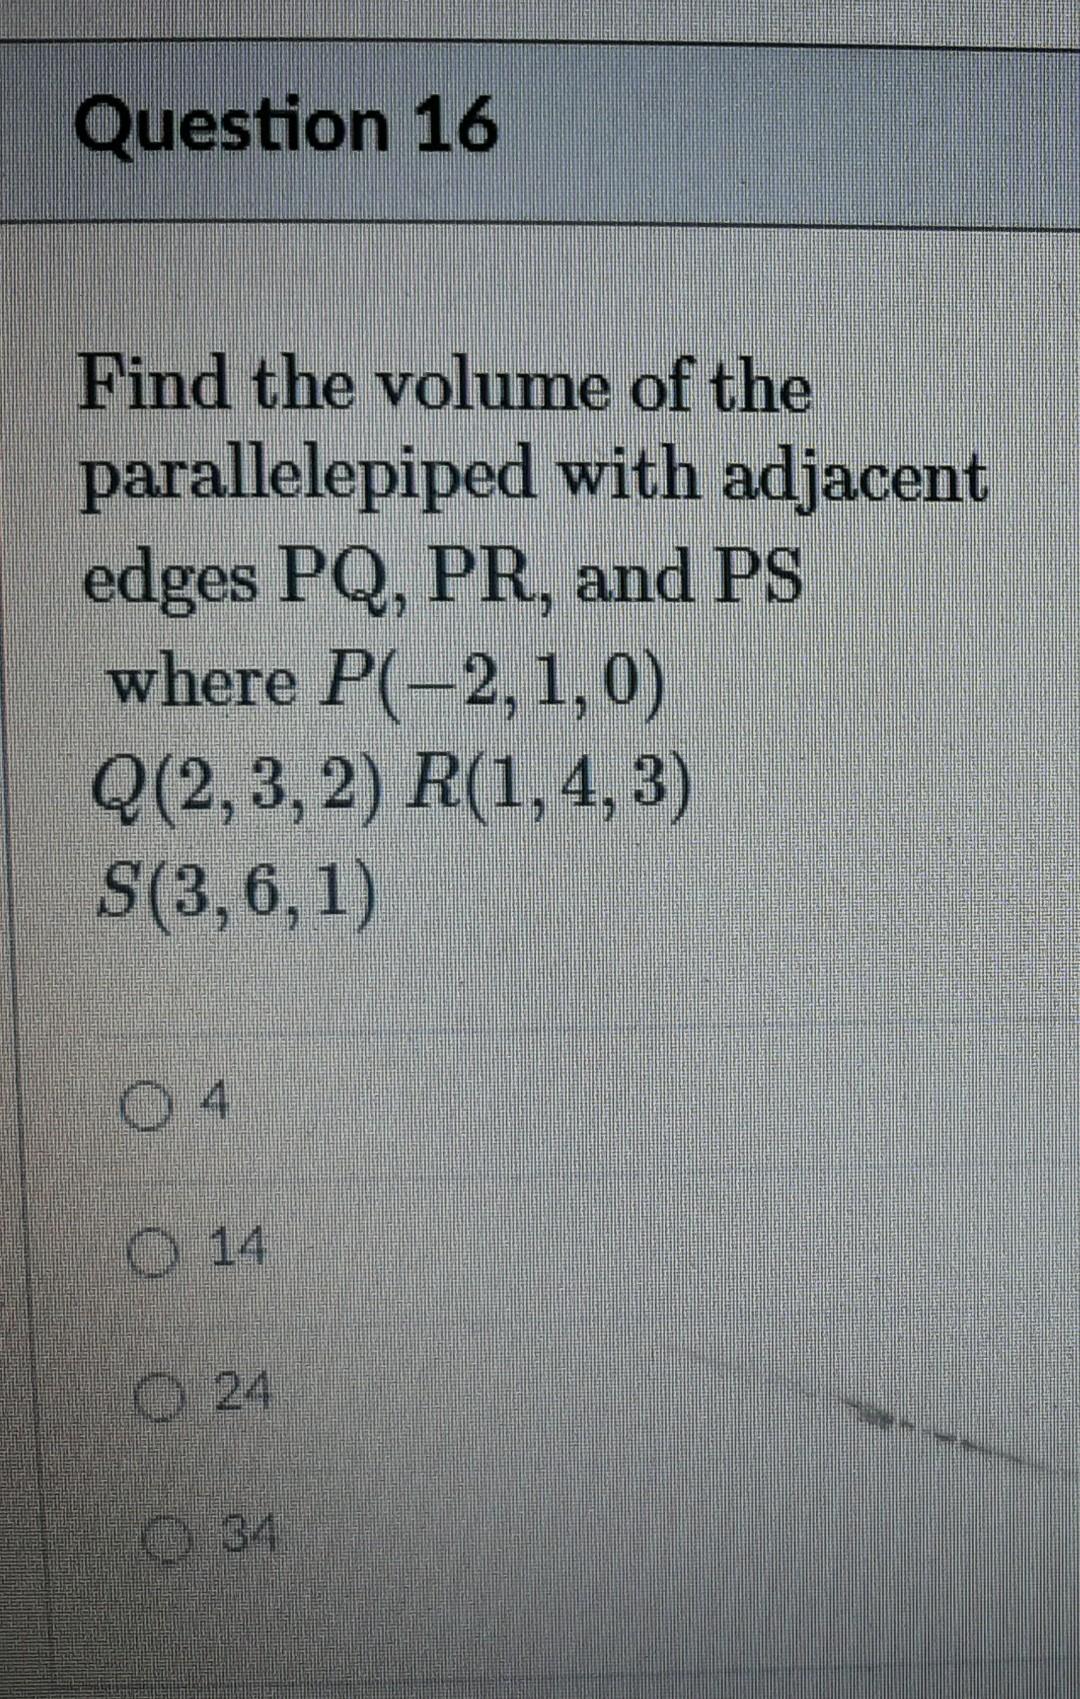 Question 16 Find The Volume Of The Parallelepiped With Adjacent Edges Pq Pr And Ps Where P 2 1 0 Q 2 3 2 R 1 4 3 S 1